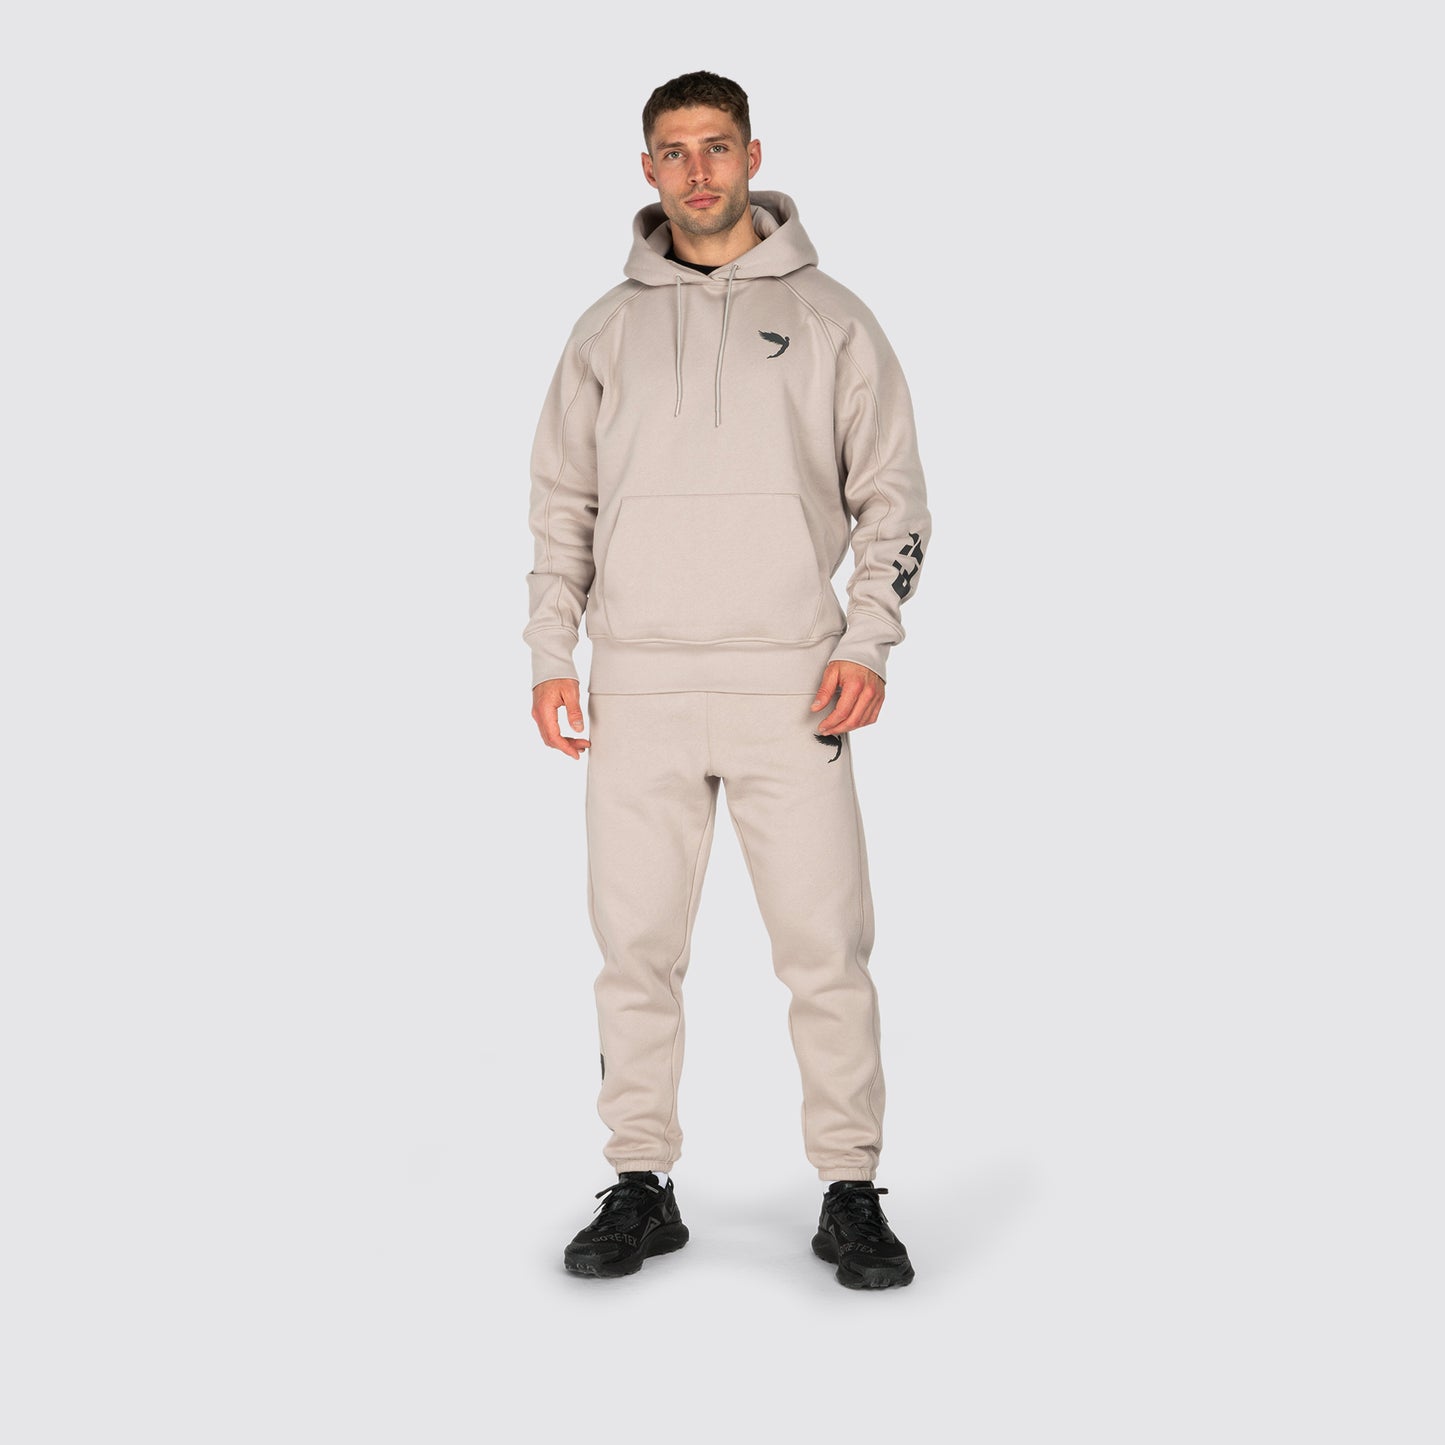 Undisputed Relaxed Fit Hoodie (8244004356348)